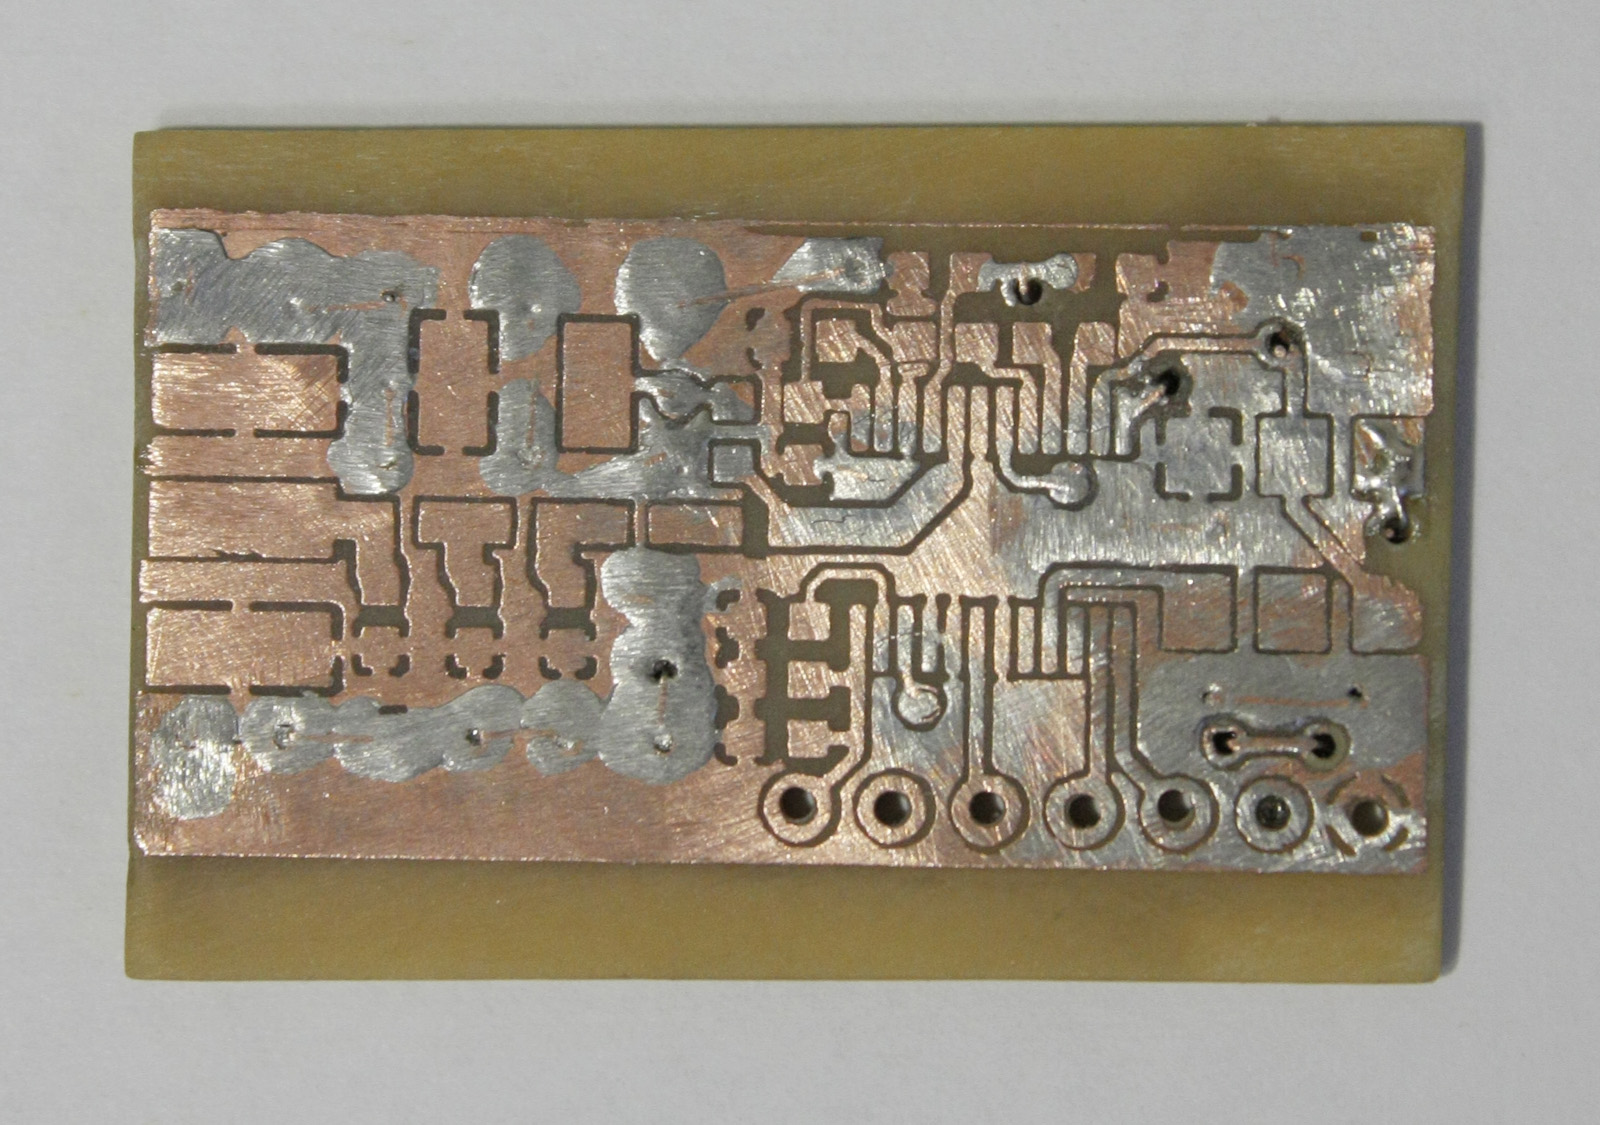 Top of unpopulated PCB